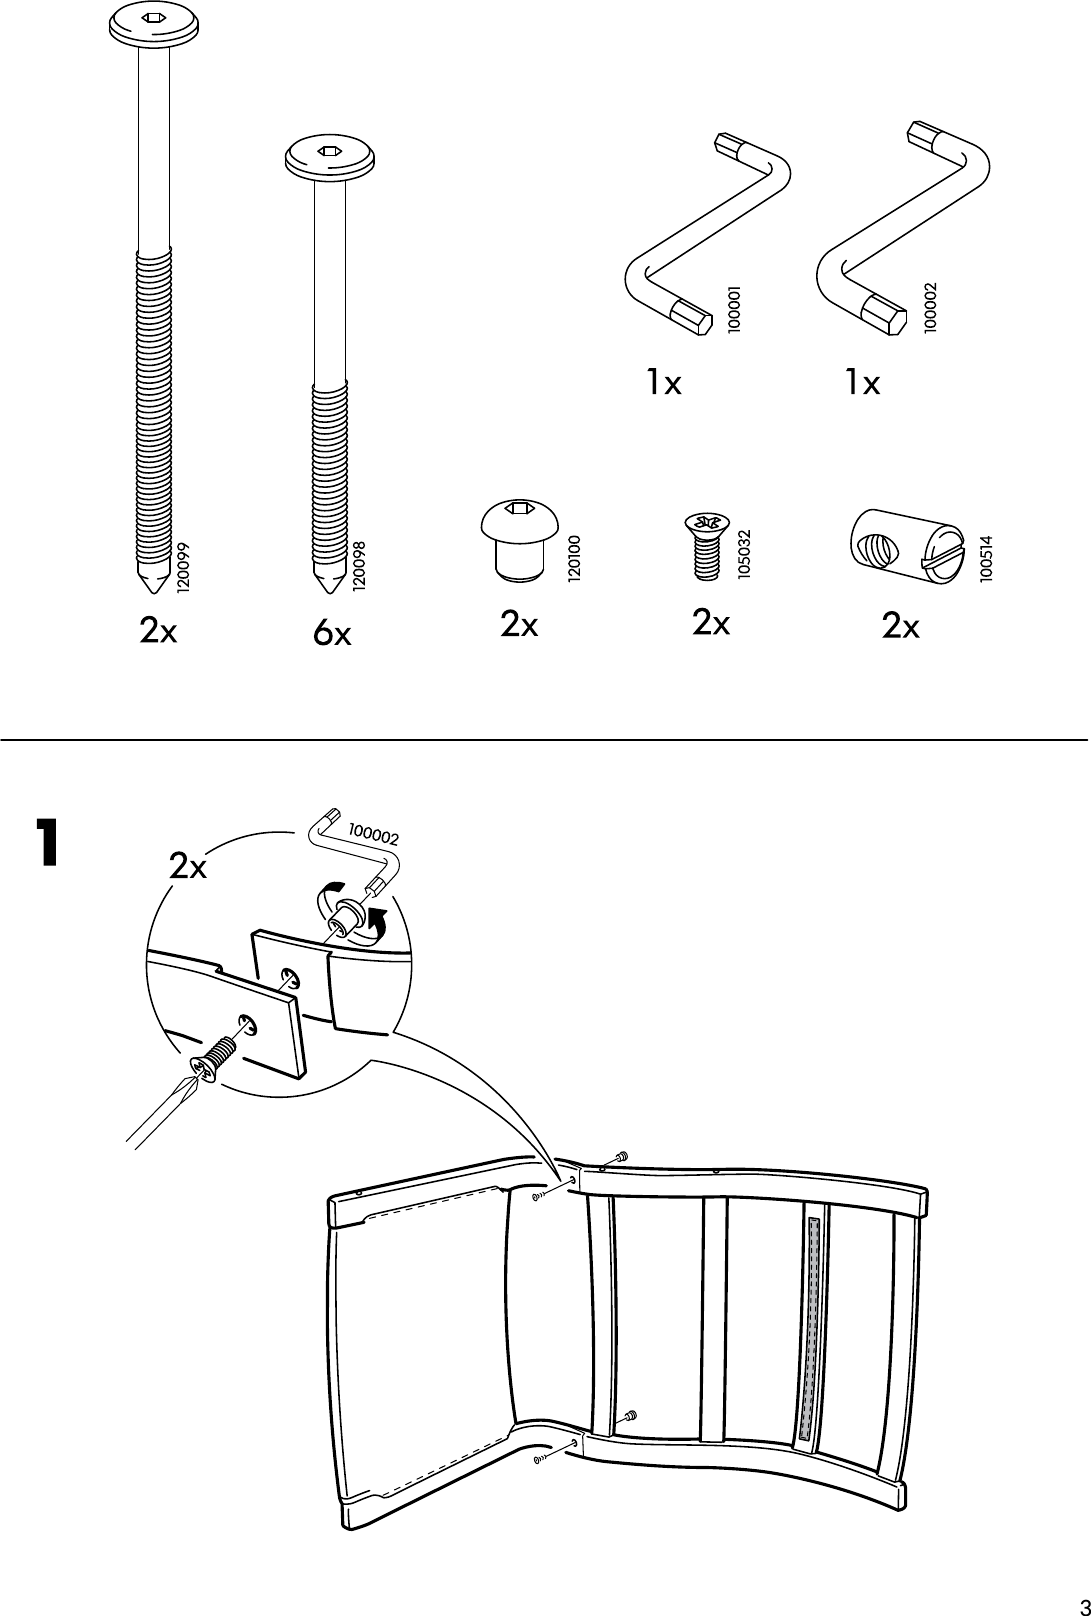 Page 3 of 8 - Ikea Ikea-Poang-Rocking-Chair-Frame-Assembly-Instruction